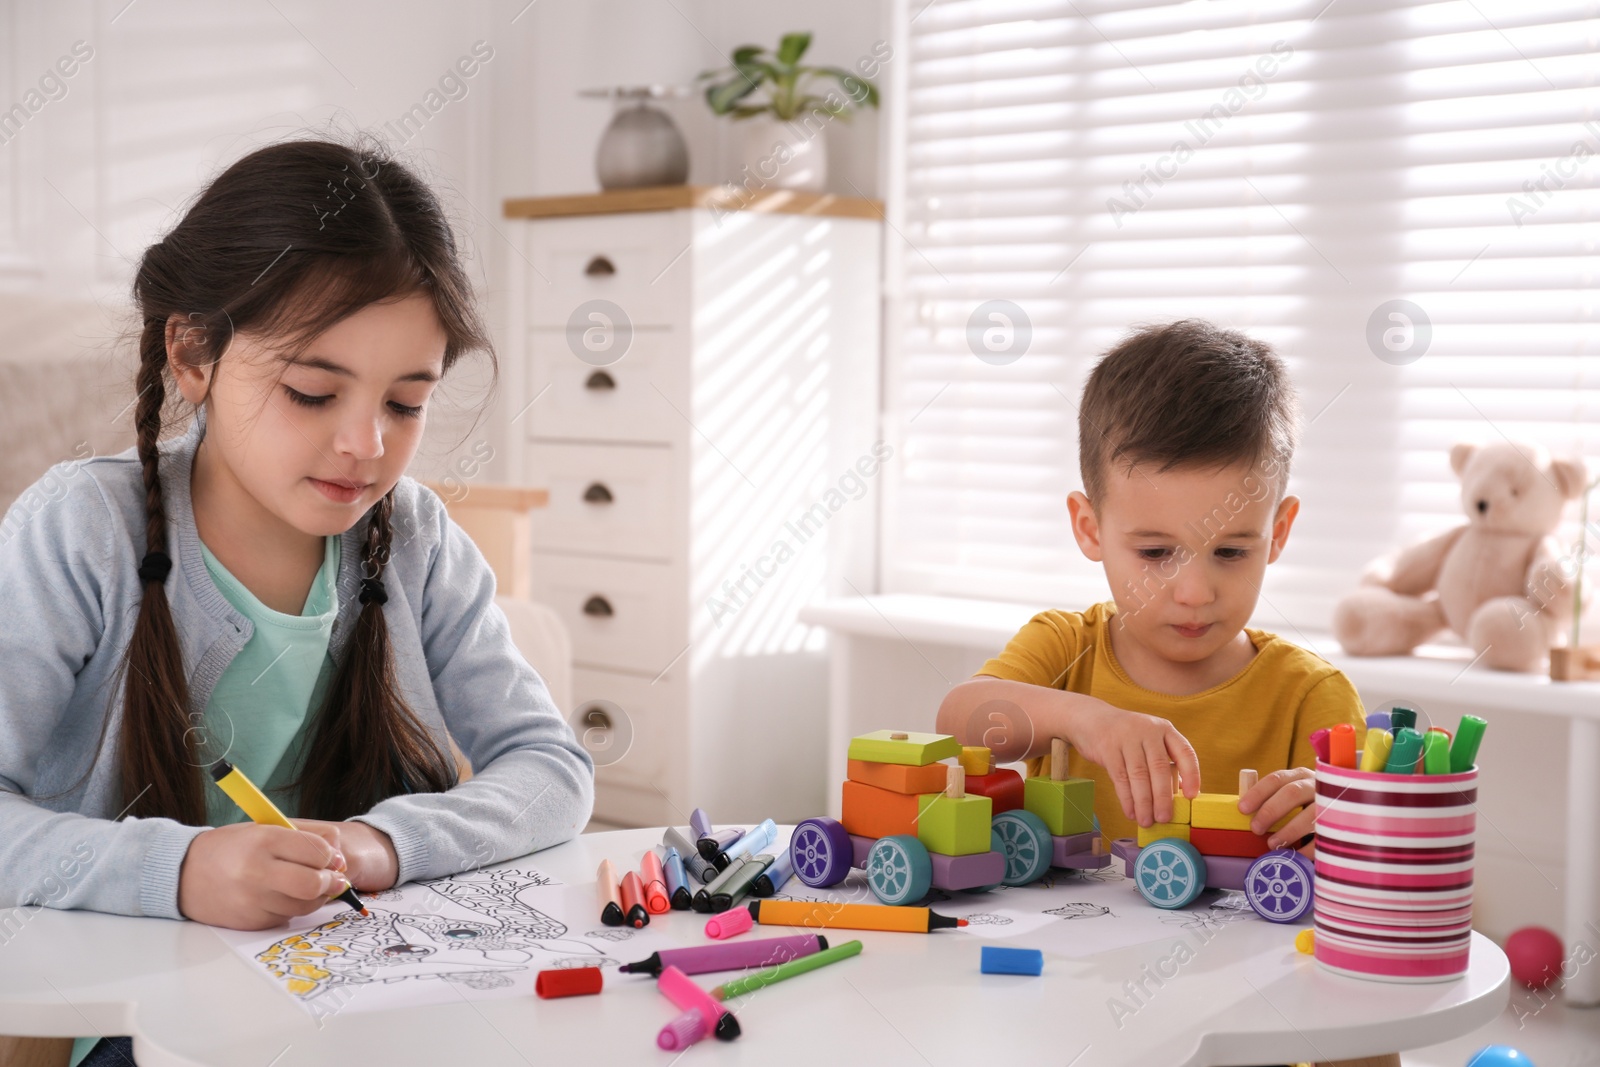 Photo of Cute children coloring drawing and playing at table in room